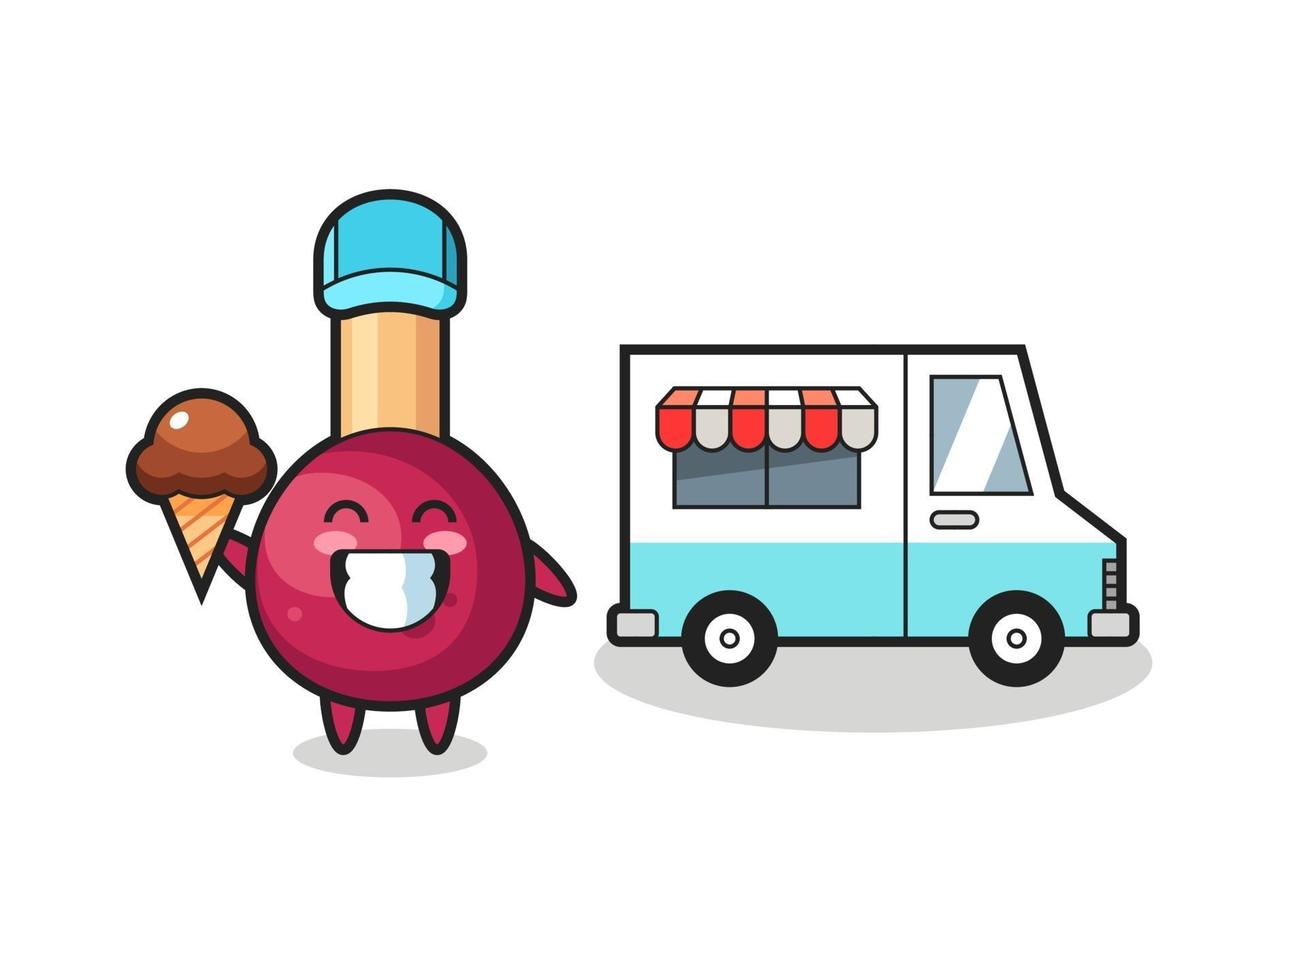 Mascot cartoon of matches with ice cream truck vector